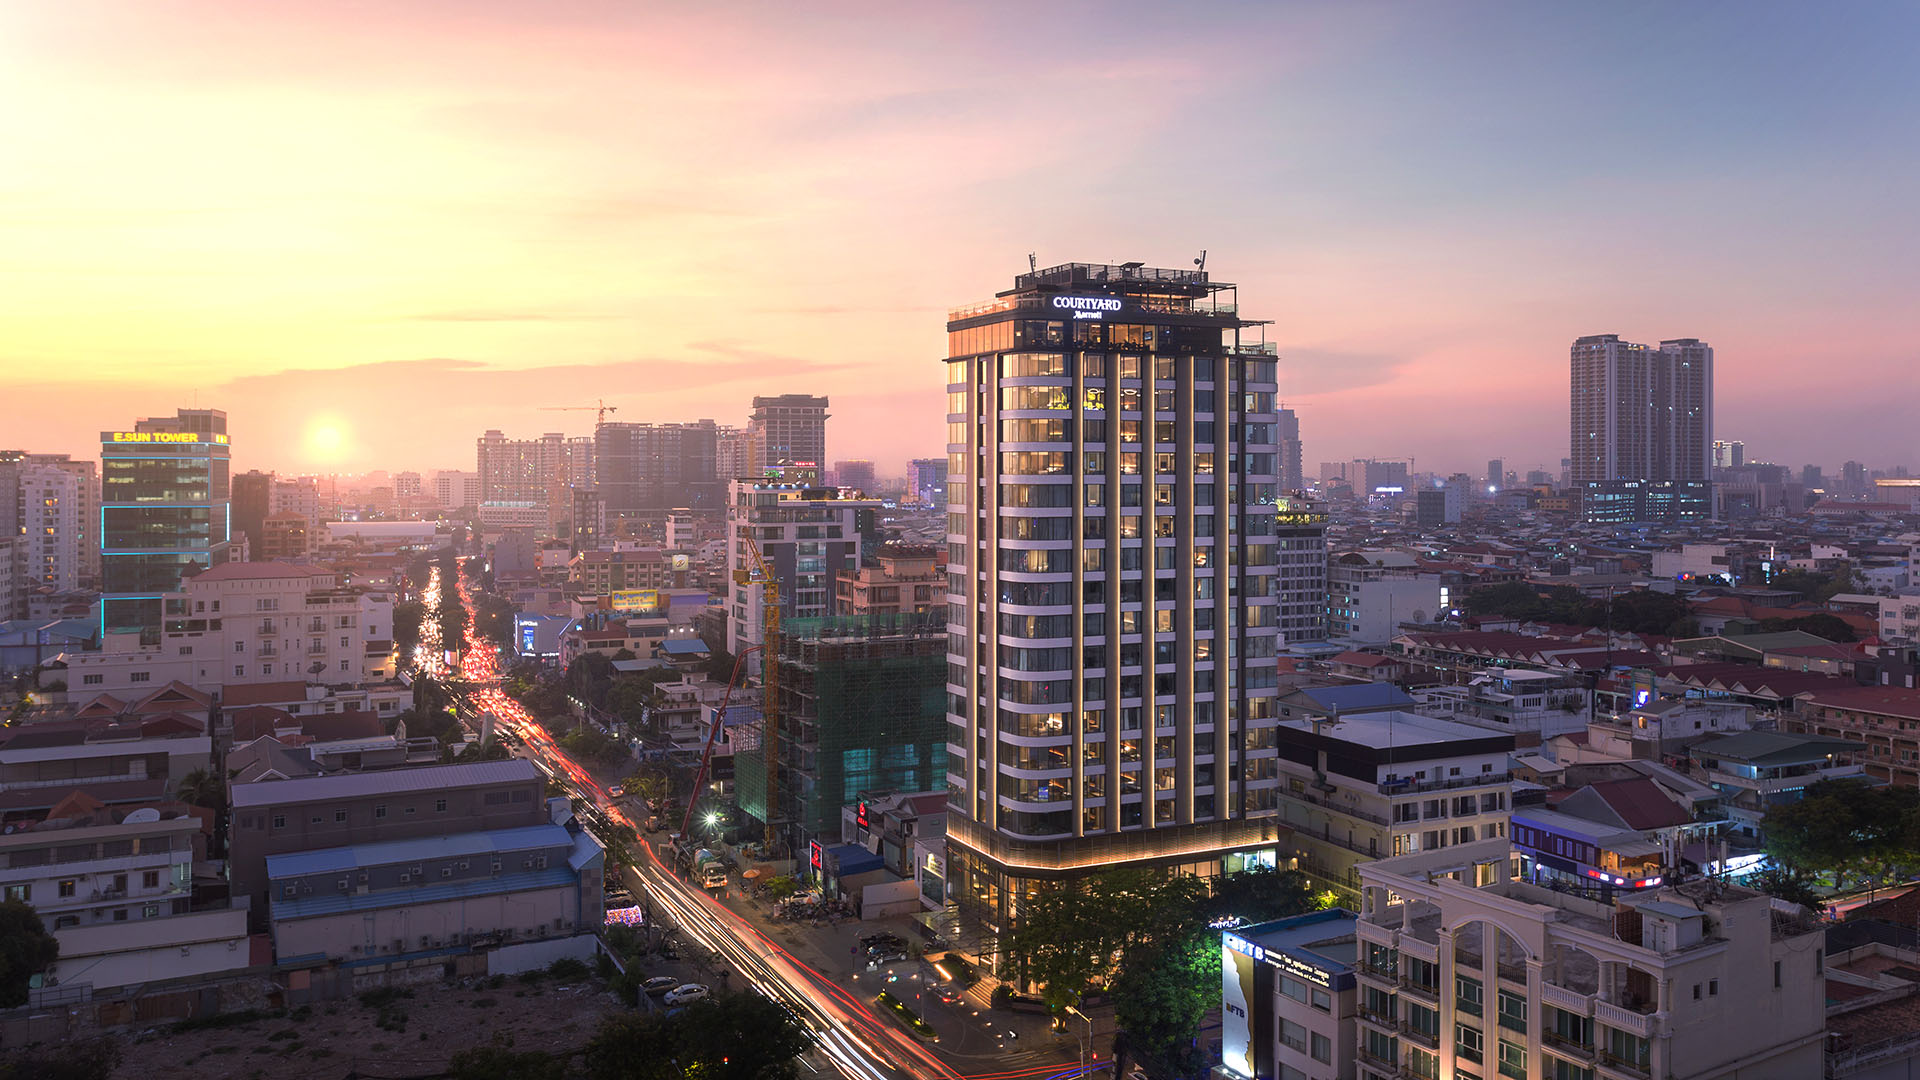 Phnom Penh Courtyard hotel and city at sunset